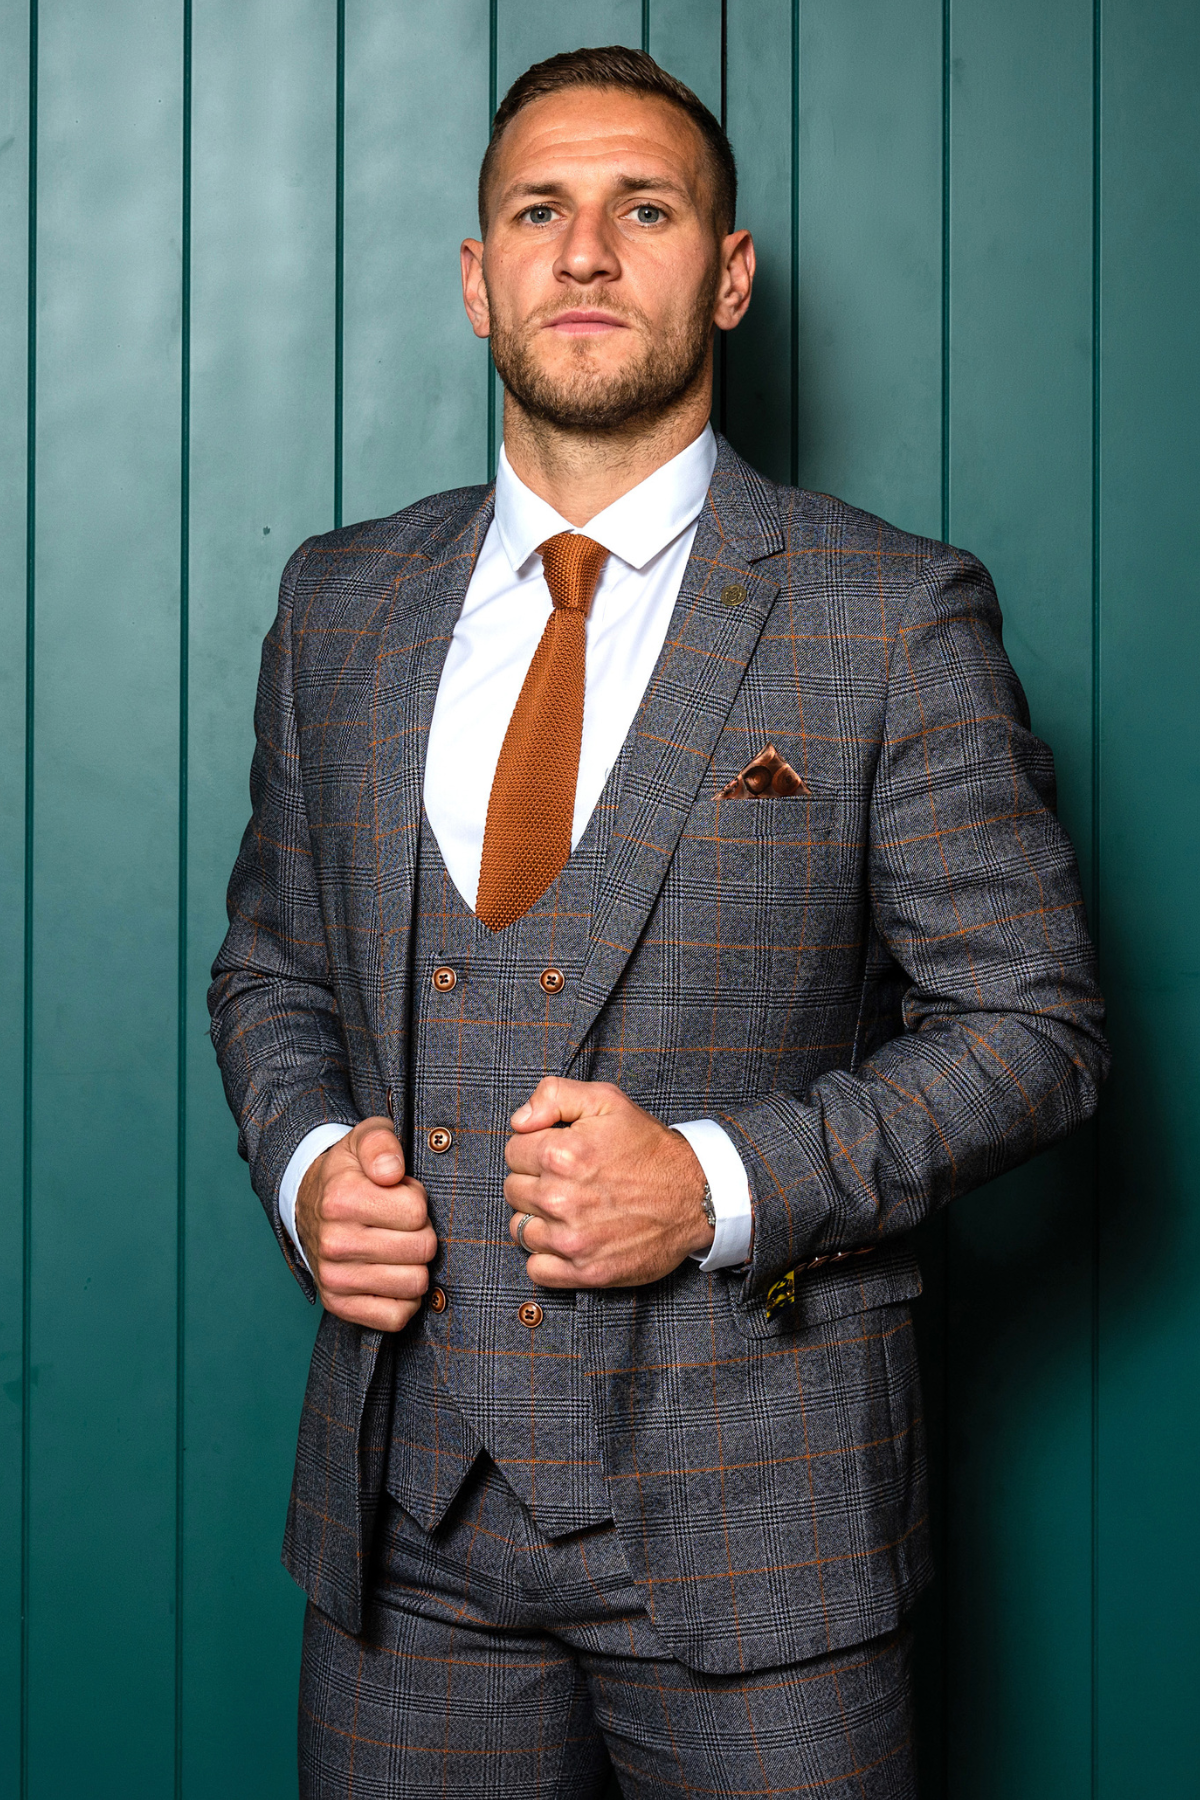 The Sheffield Utd Collection - Billy Sharp in Jenson Grey Check Suit-celebs-marcdarcy-Marc Darcy